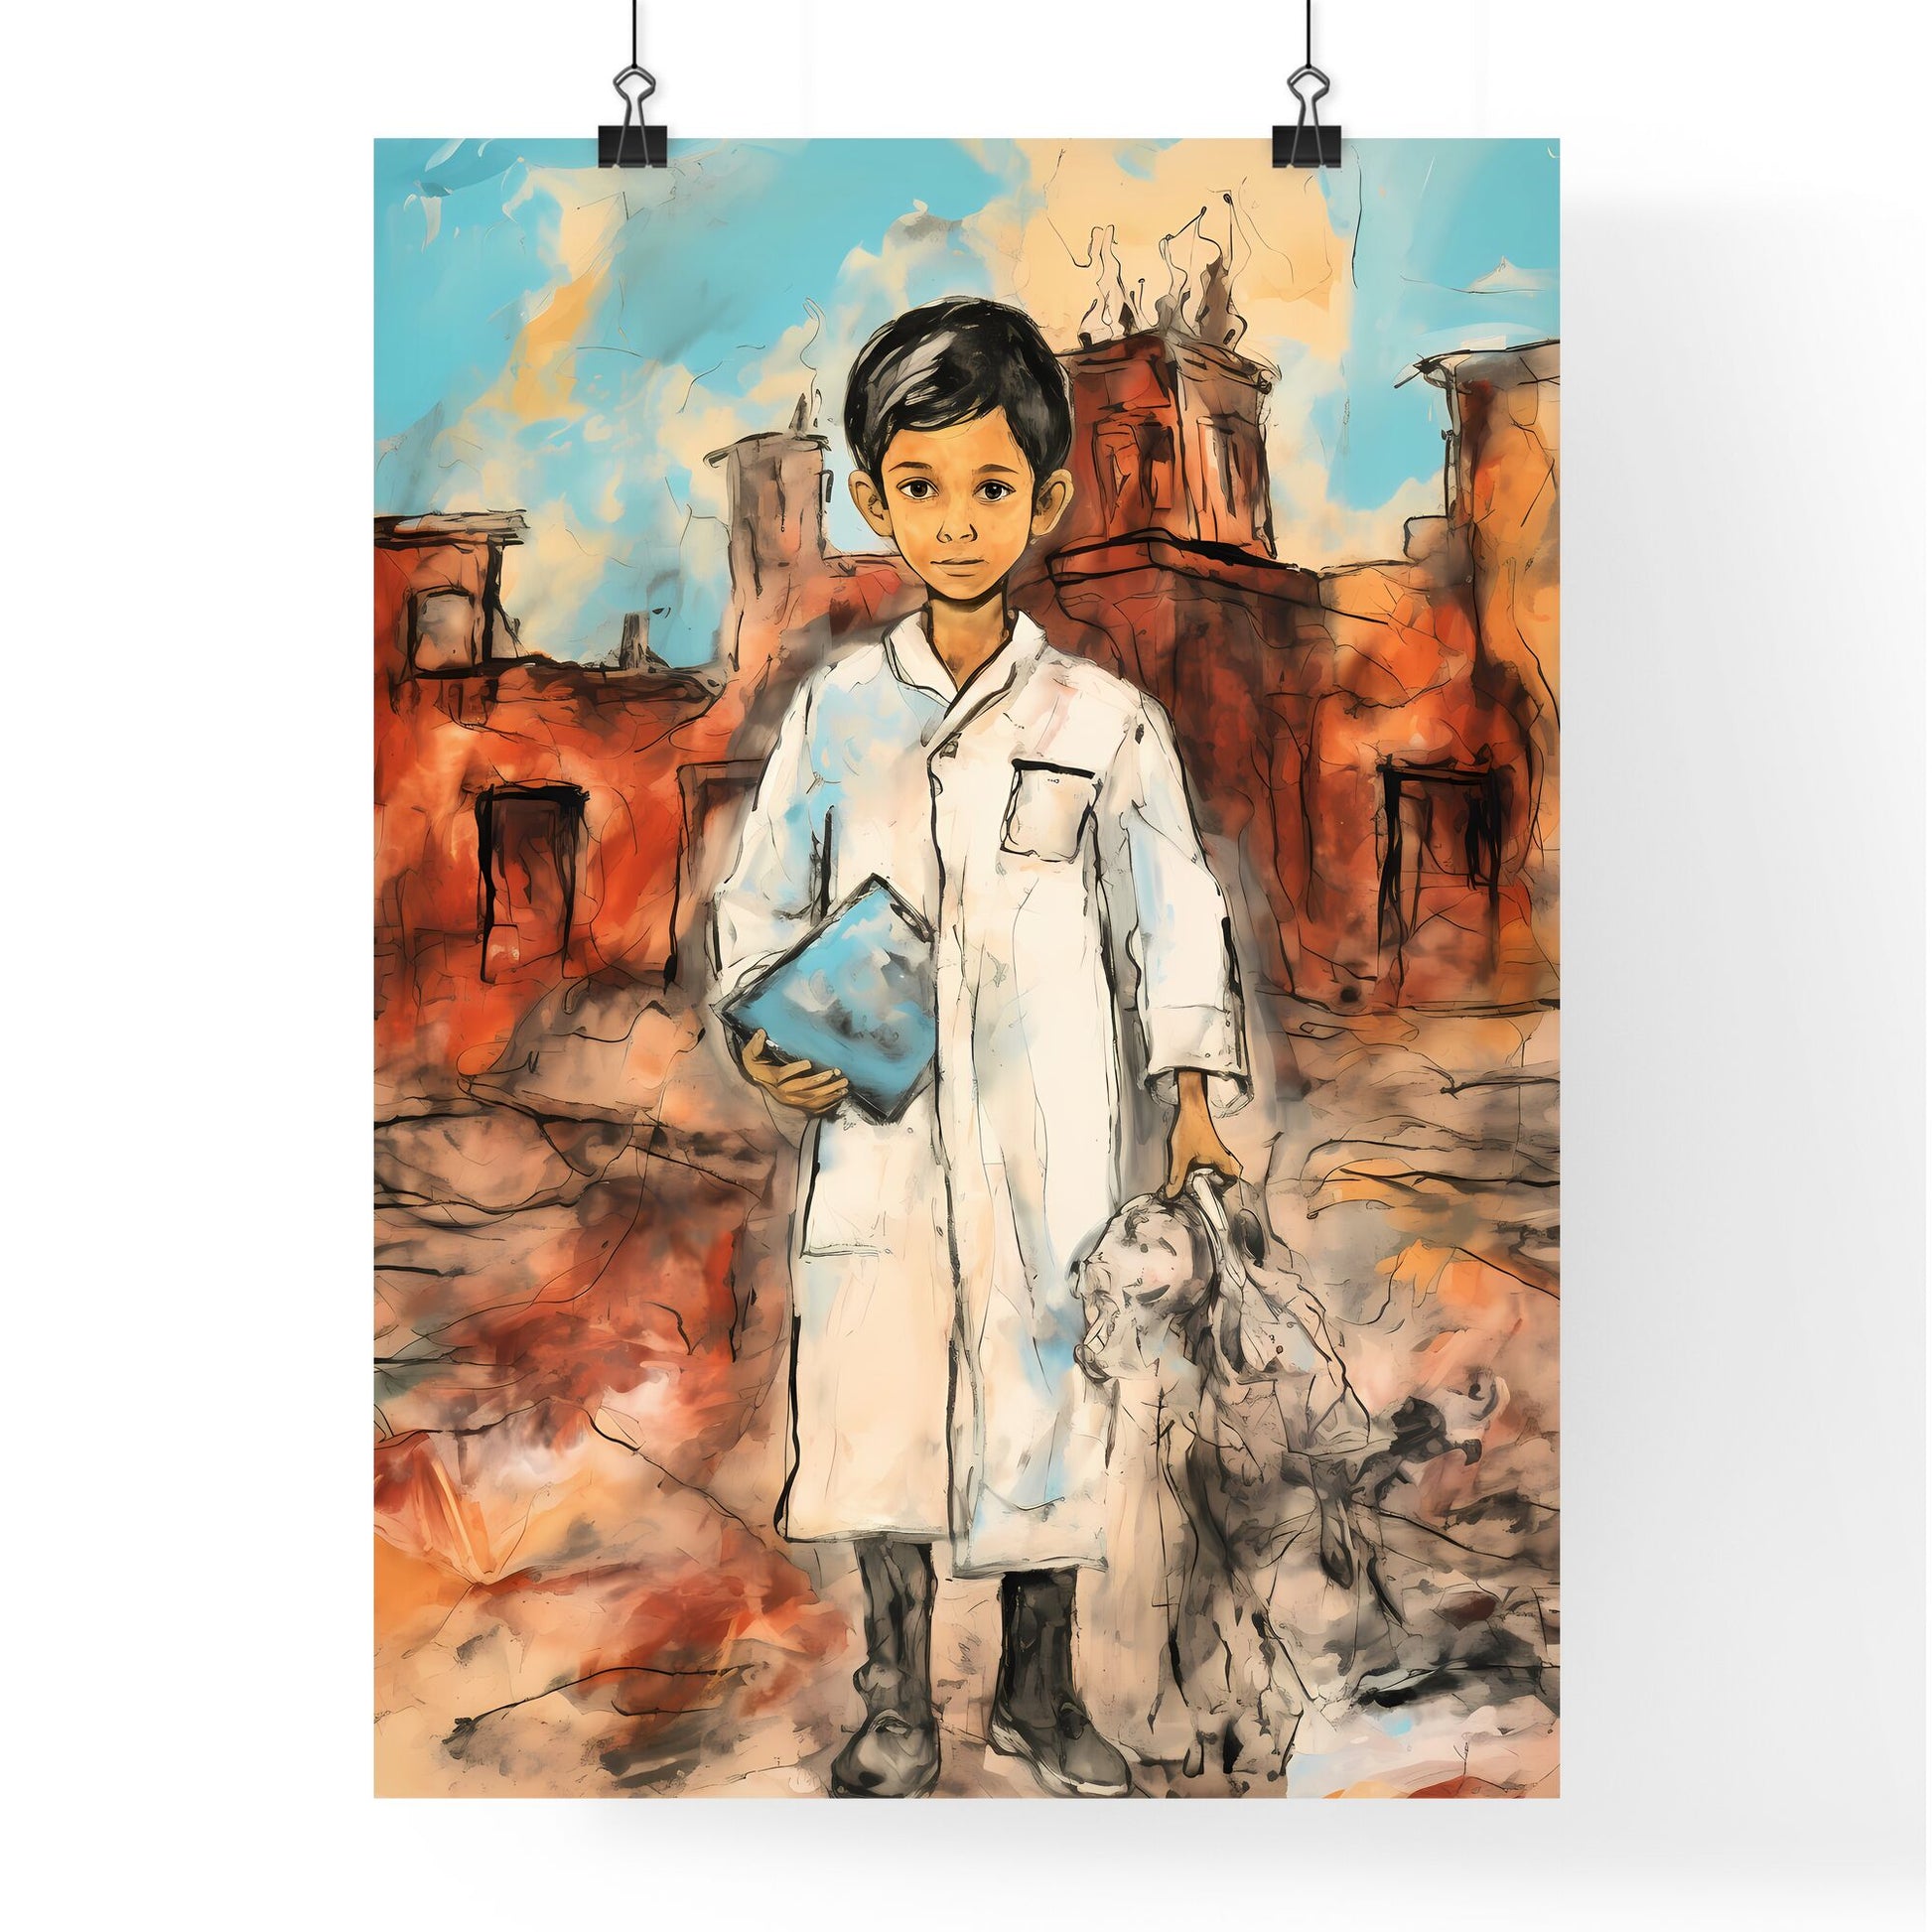 A Poster of kid dressed as a doctor - A Boy In A White Coat Default Title